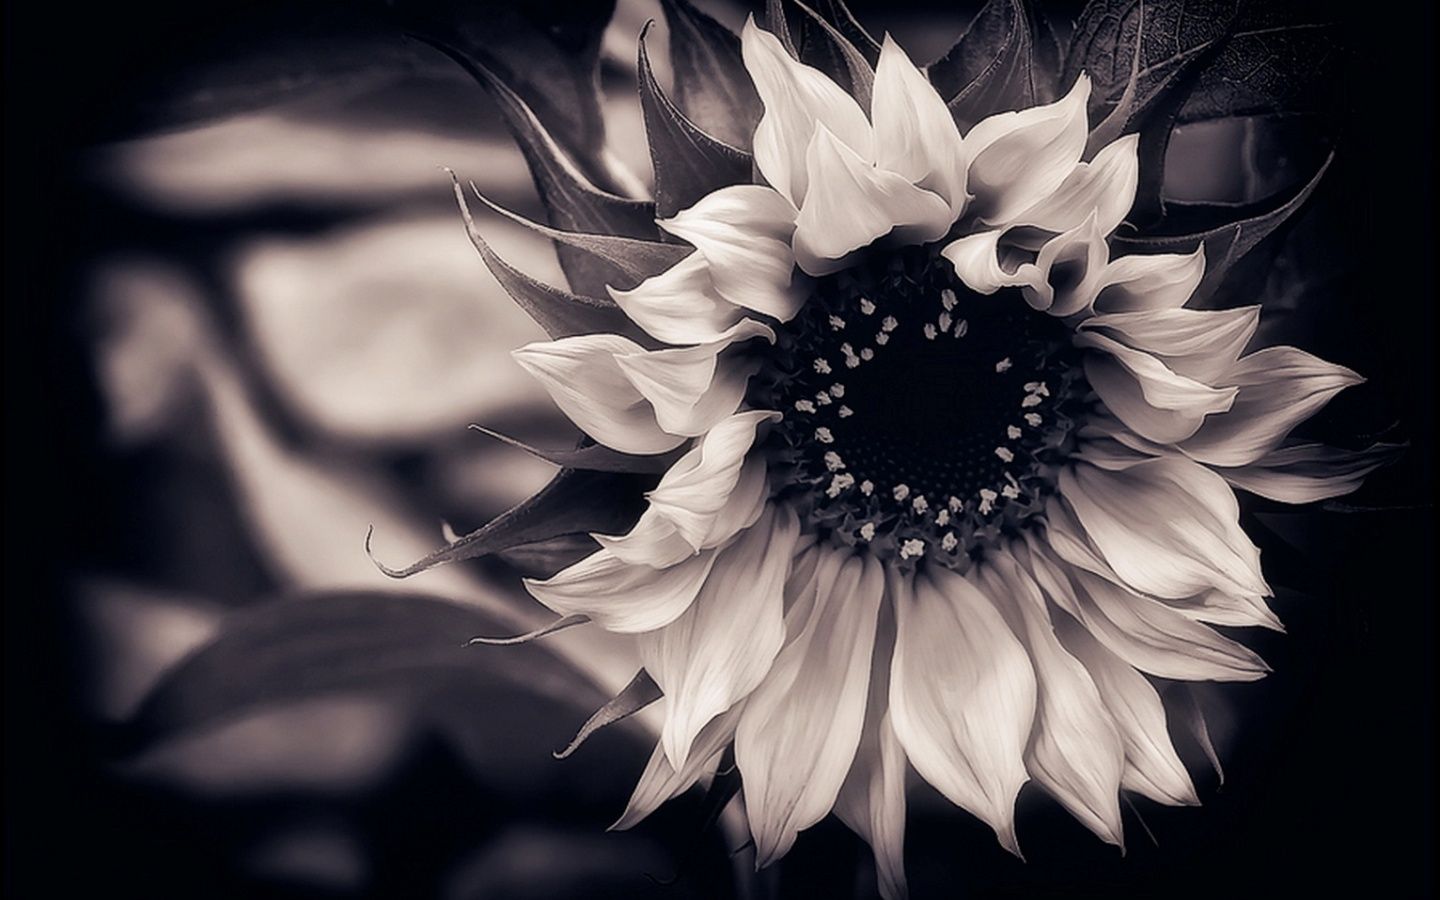 Beautiful Black And White Flower Wallpapers